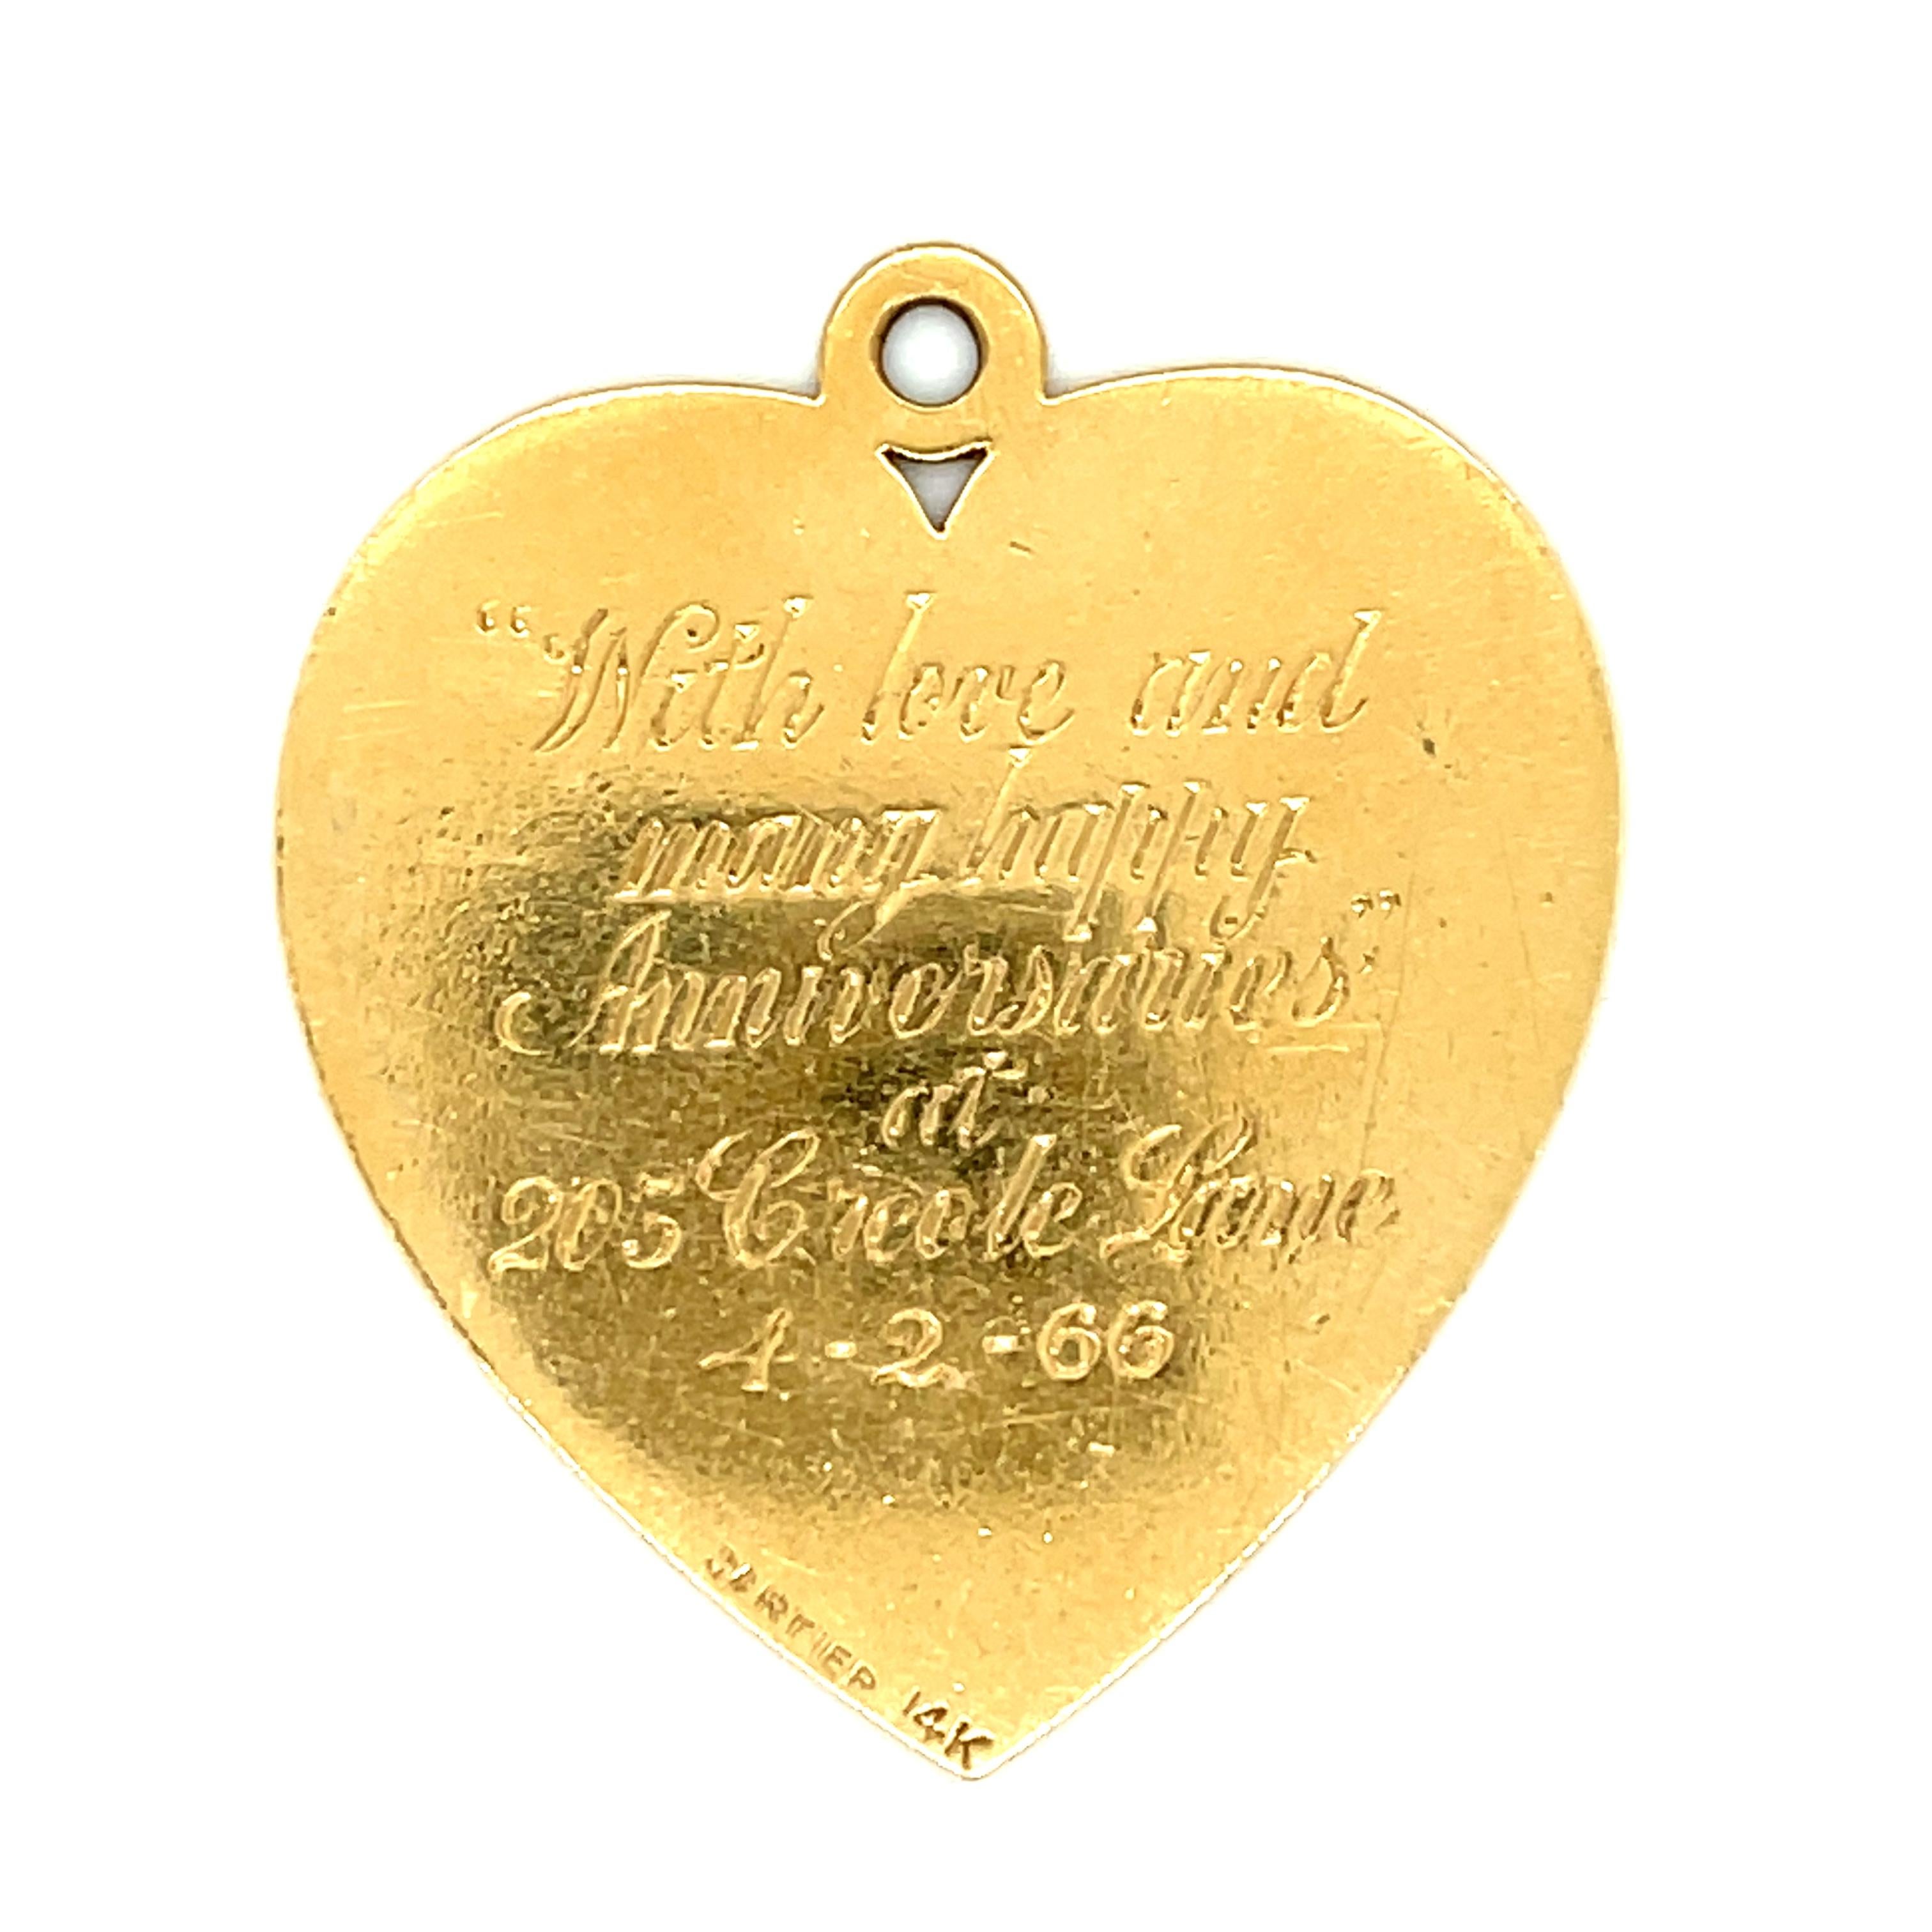 A pretty 14k yellow gold heart charm by Cartier with an engraved home on the front of the heart, from 1966. The charm has a detailed engraved house surrounded by trees on the front. The reverse has the inscription, “With love and many happy